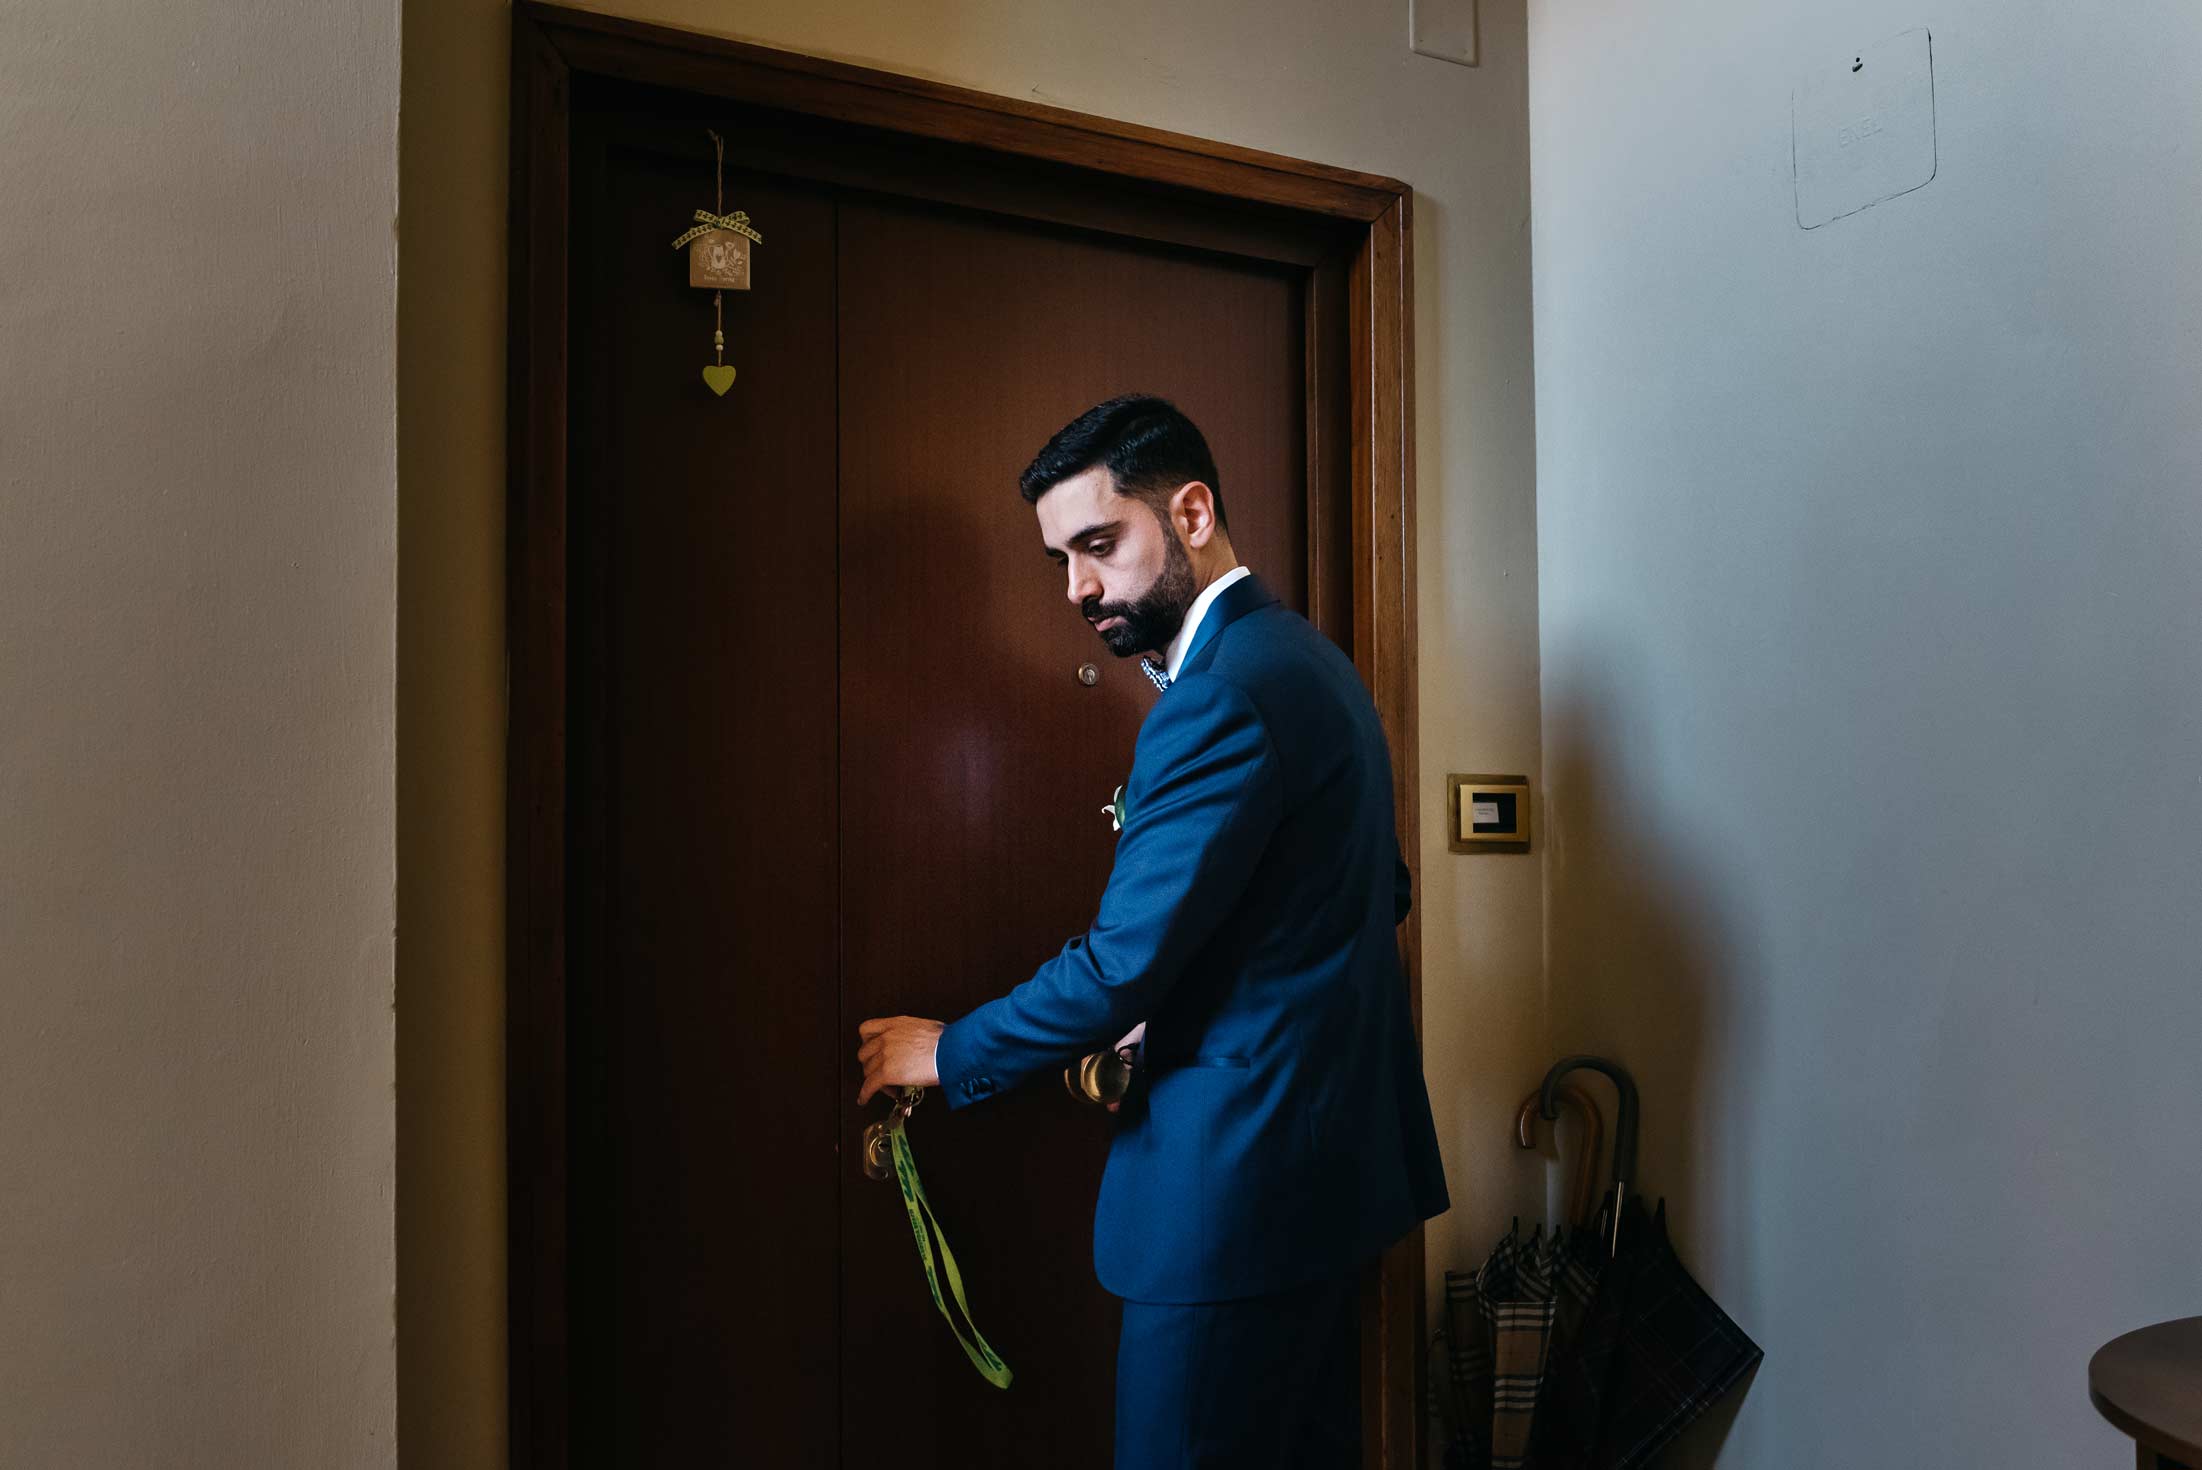 Groom exiting from home in documentary wedding photography style